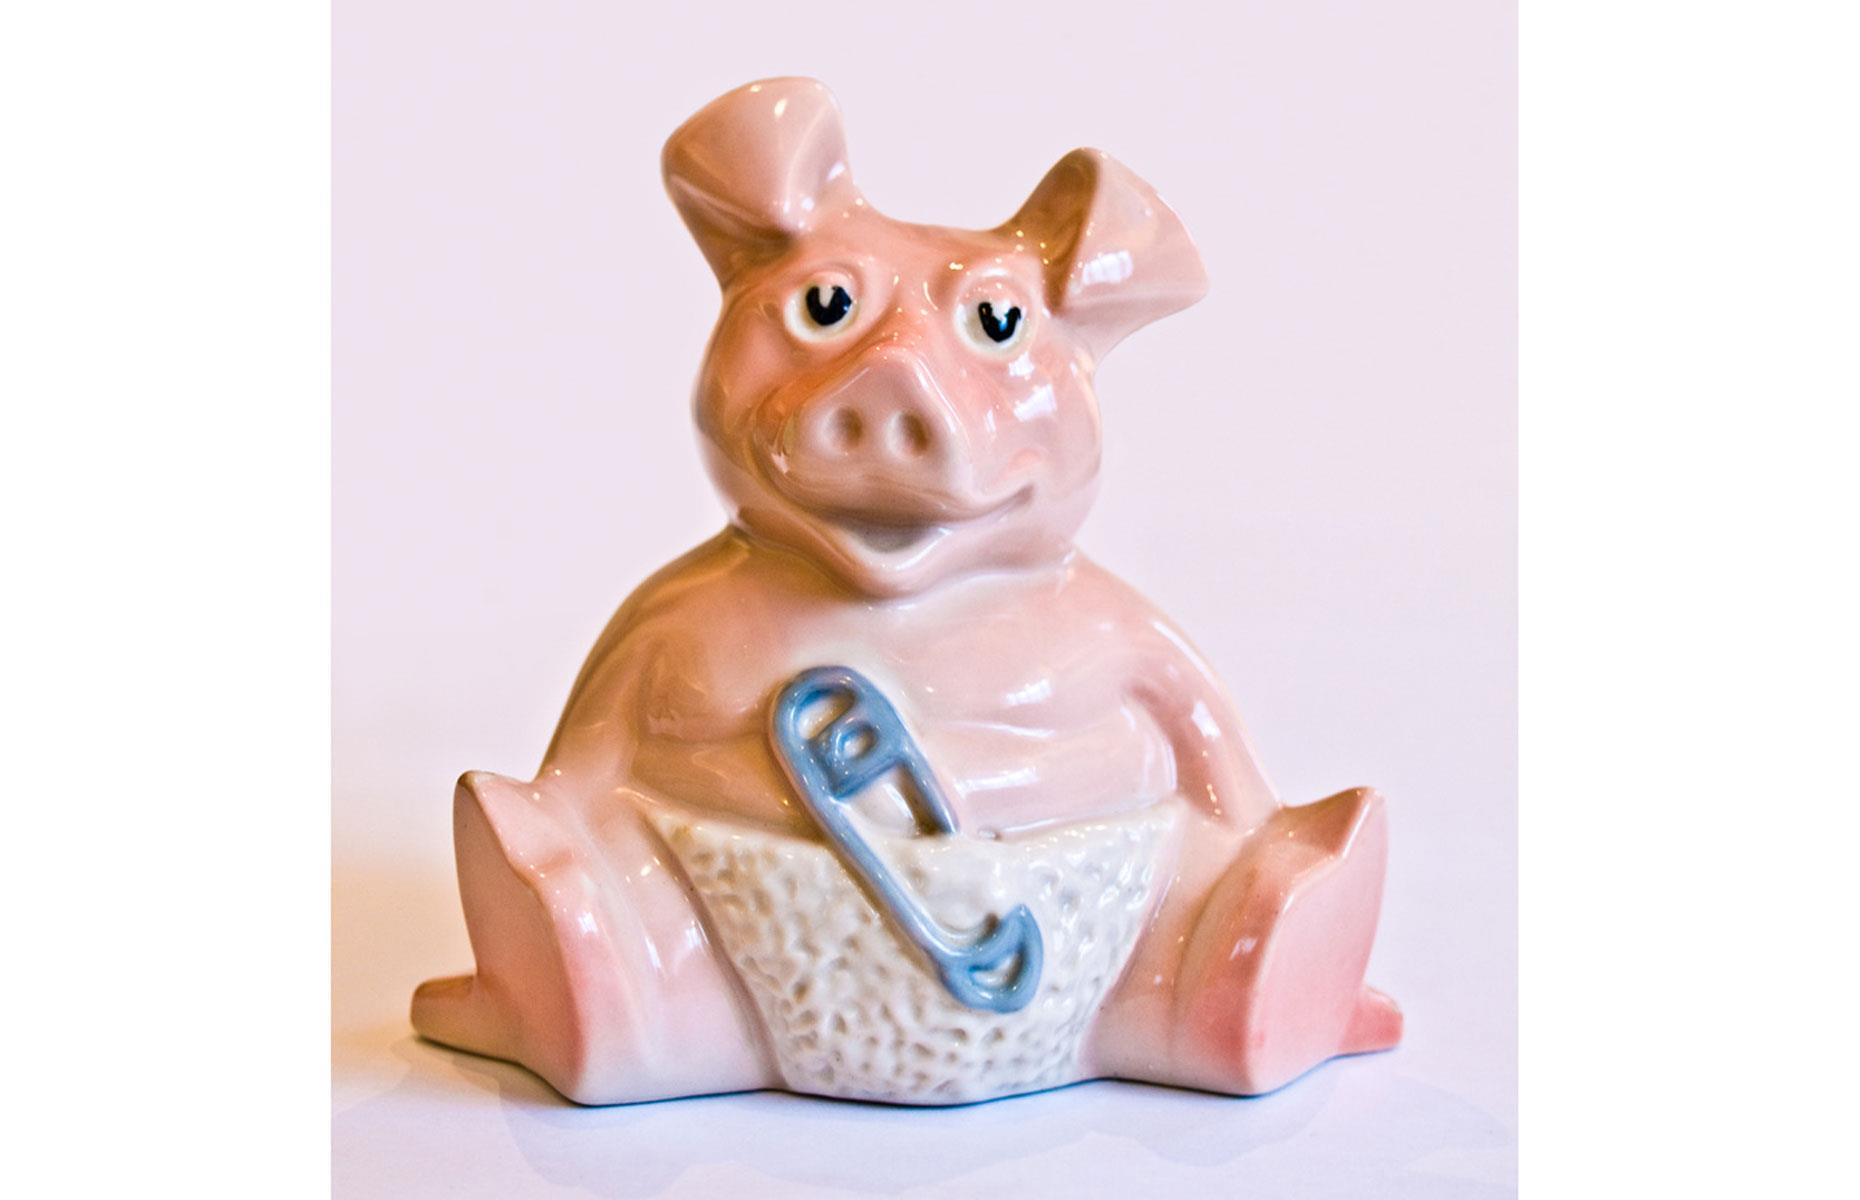 Wade NatWest Woody Pig coin bank: up to $25 (£20)